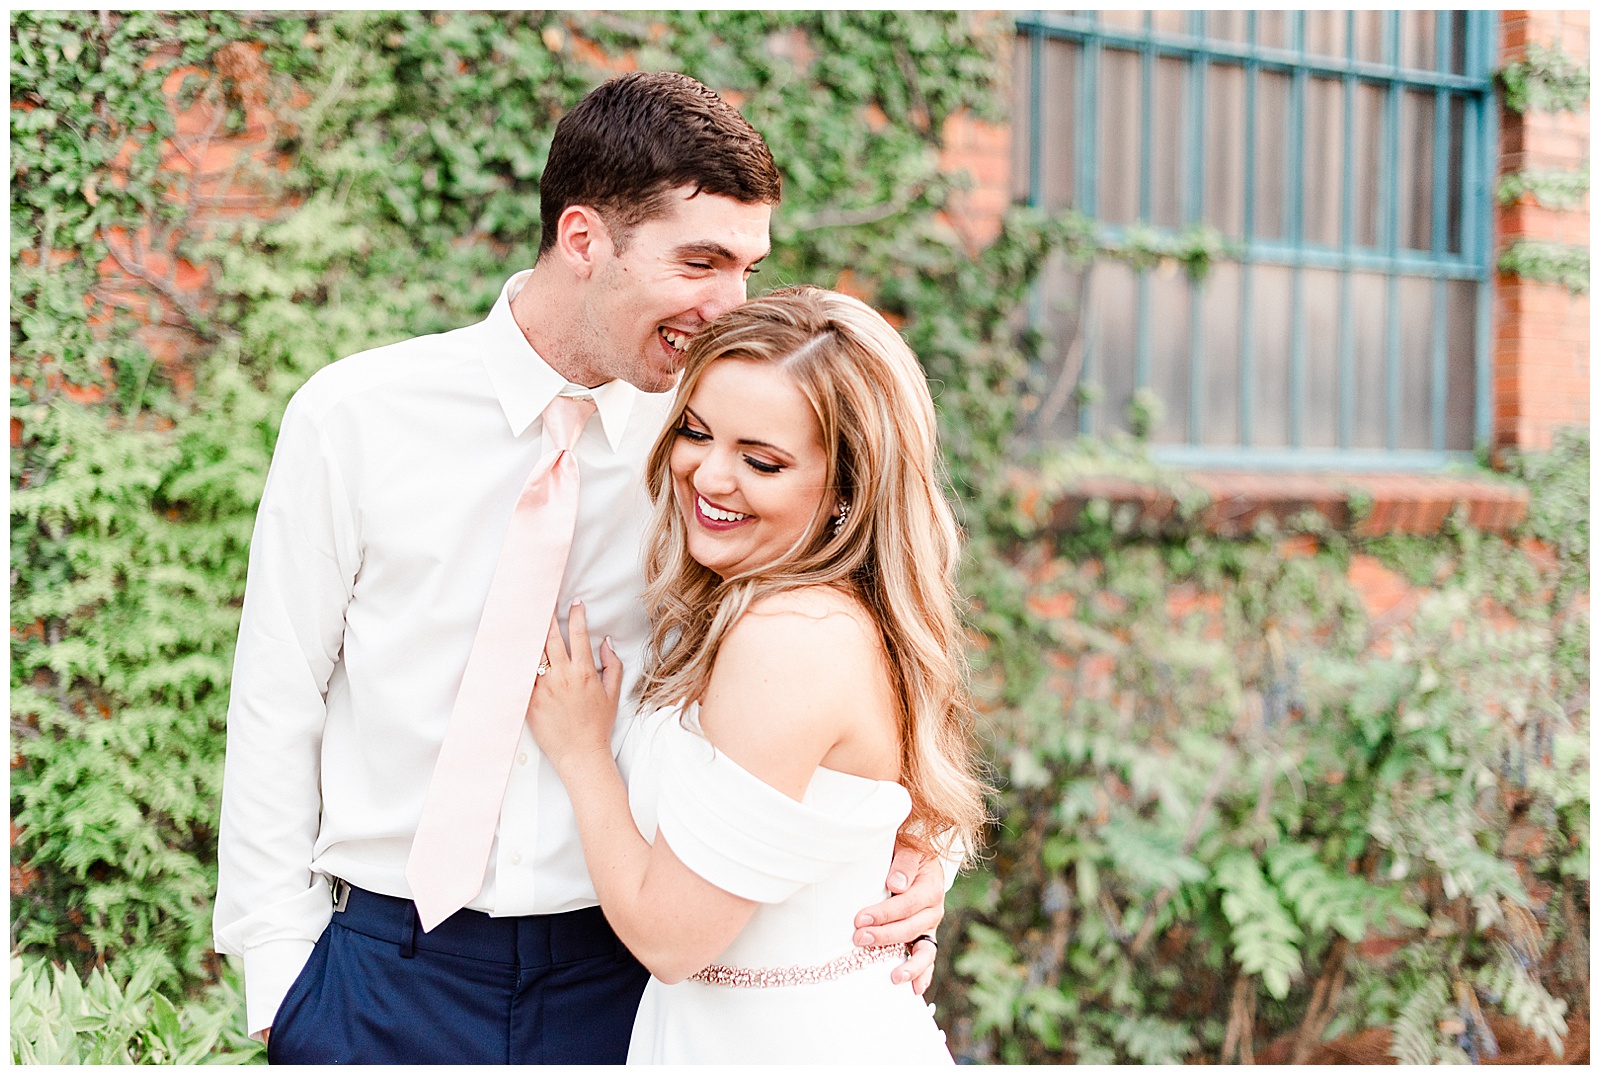 Stunning Modern Bride and Groom with off shoulder wedding dress and blue suit in outdoor portraits in front of vine-covered brick building from Summer Wedding in Charlotte, NC | Check out the full wedding at KevynDixonPhoto.com